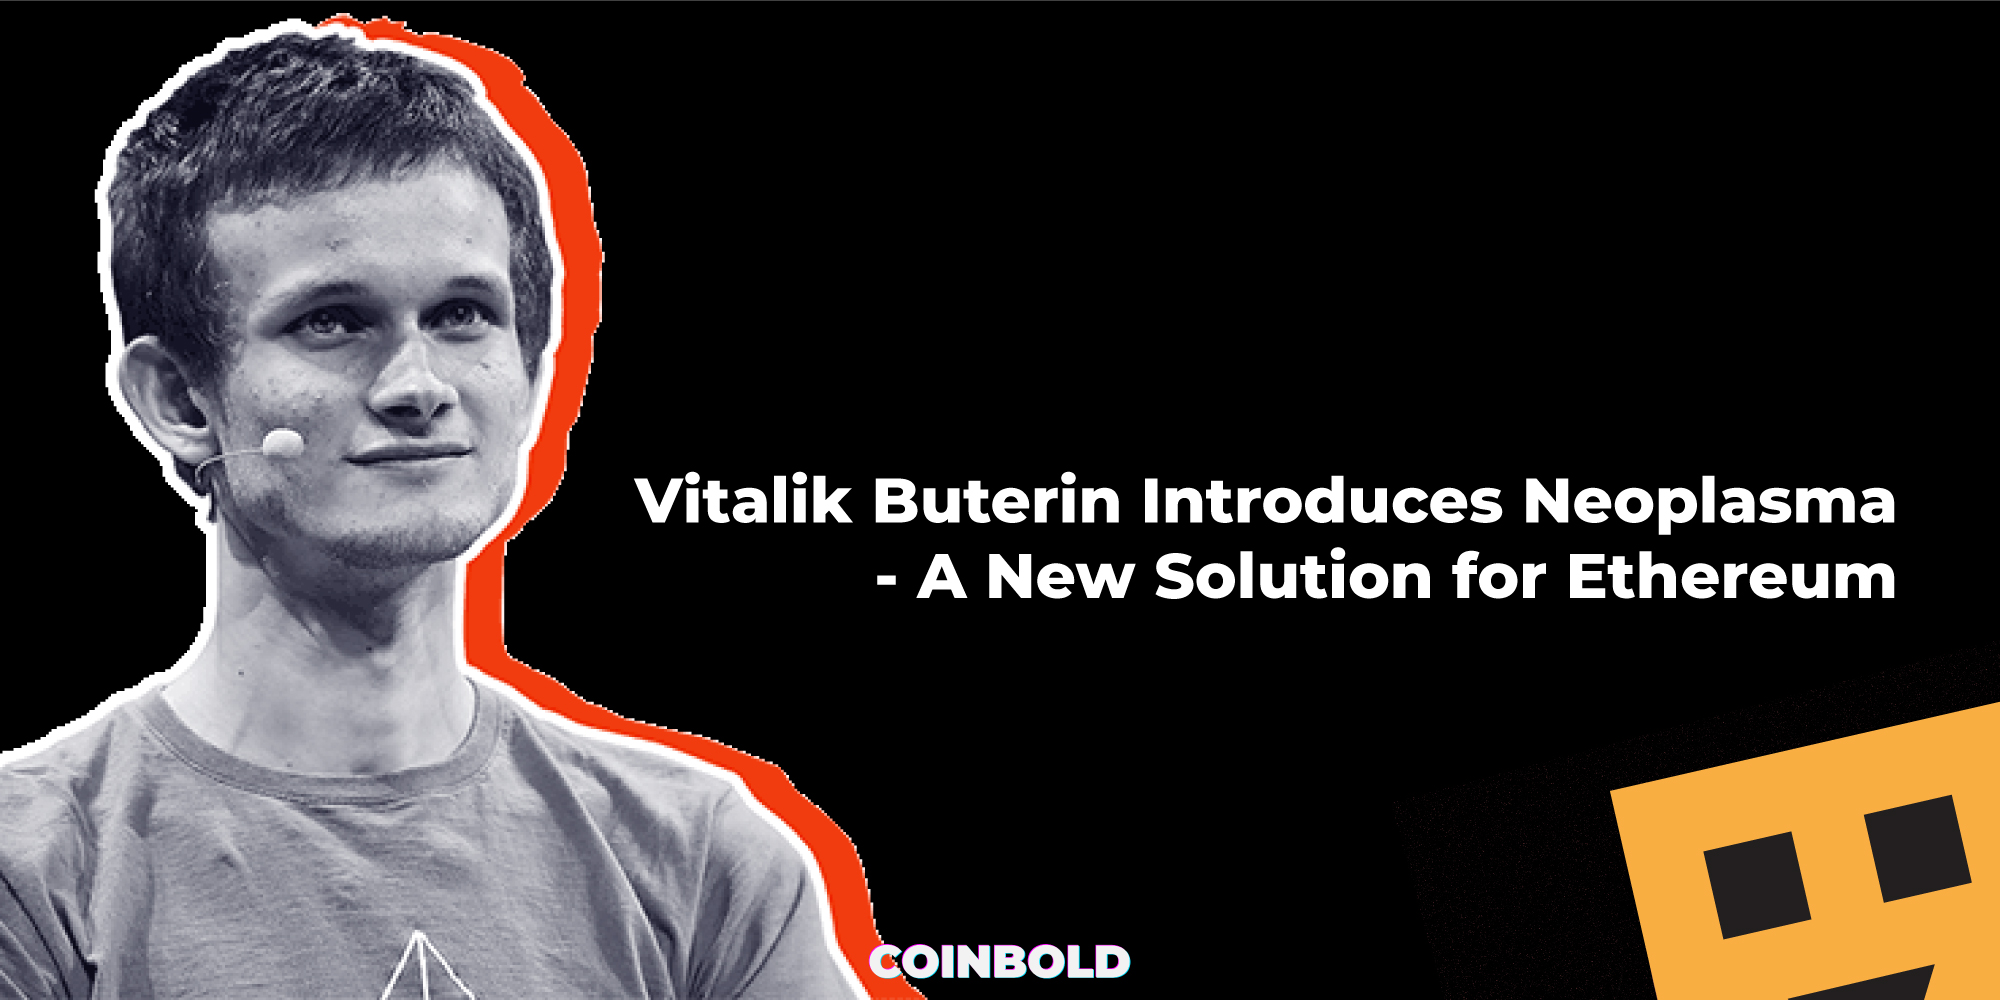 Vitalik Buterin Introduces Neoplasma – A New Solution for Ethereum